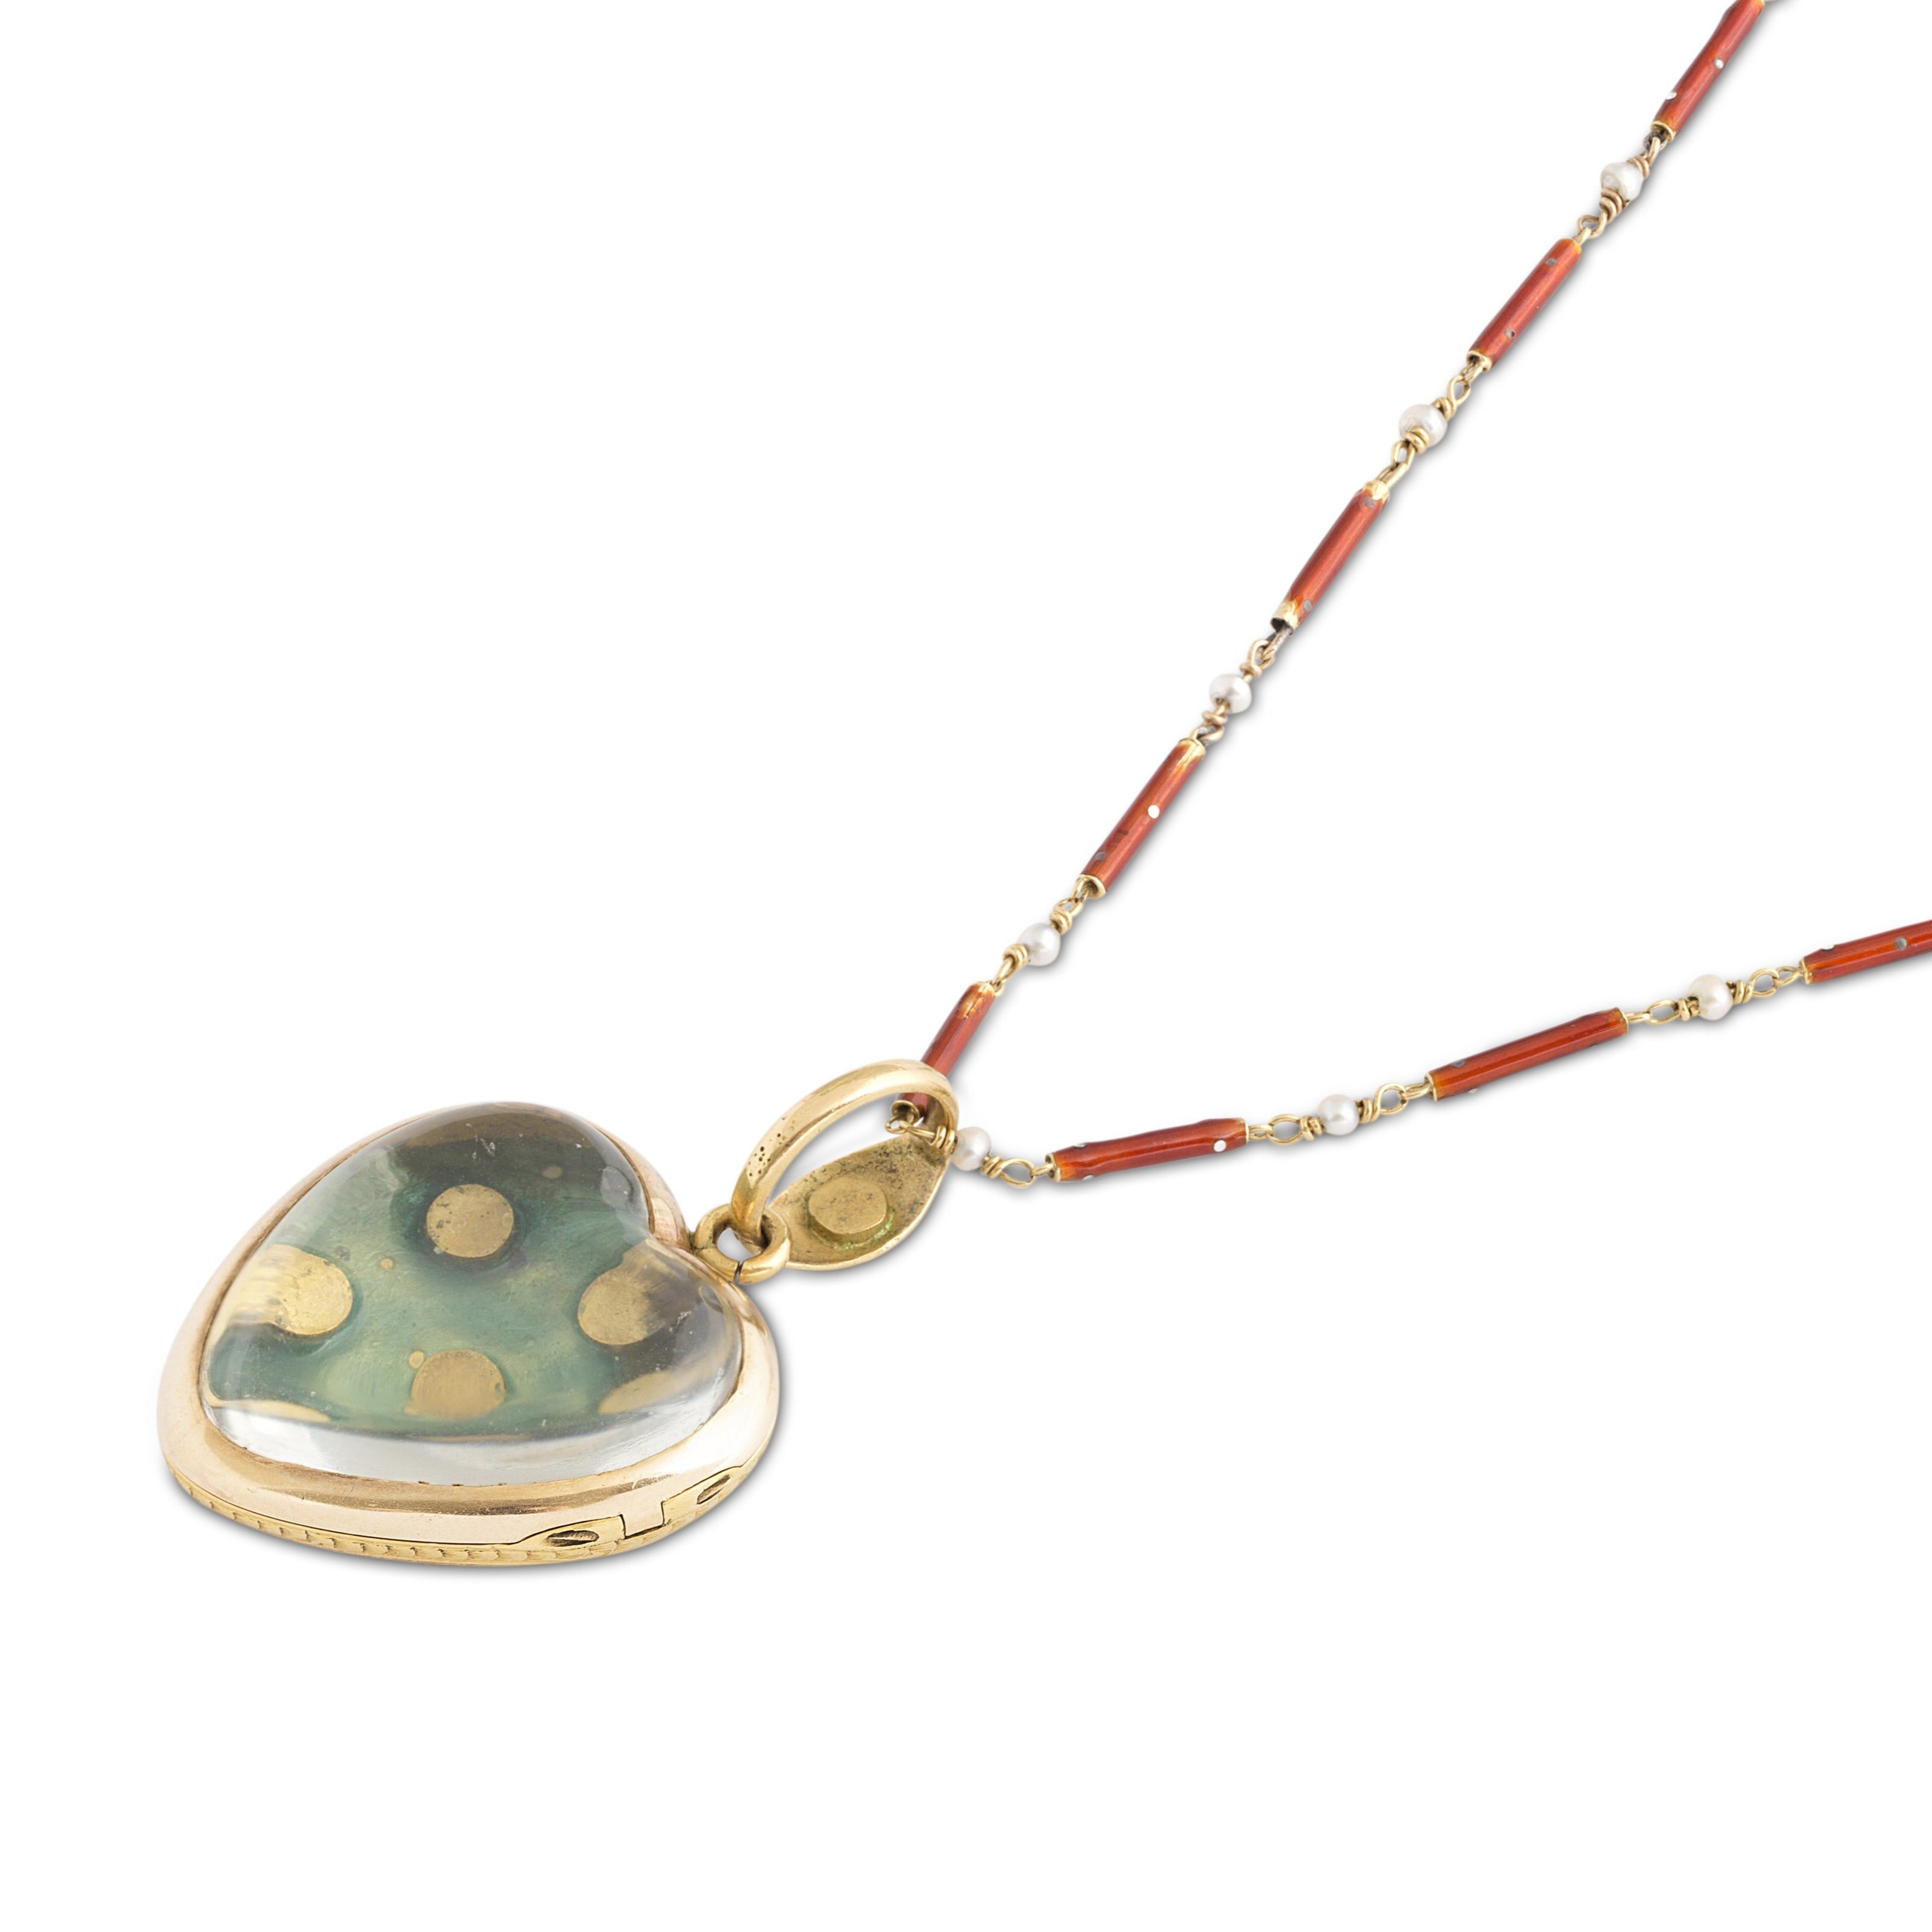 Victorian Guillouche Enamel, Pearl, and 14k Gold Heart Locket and Chain